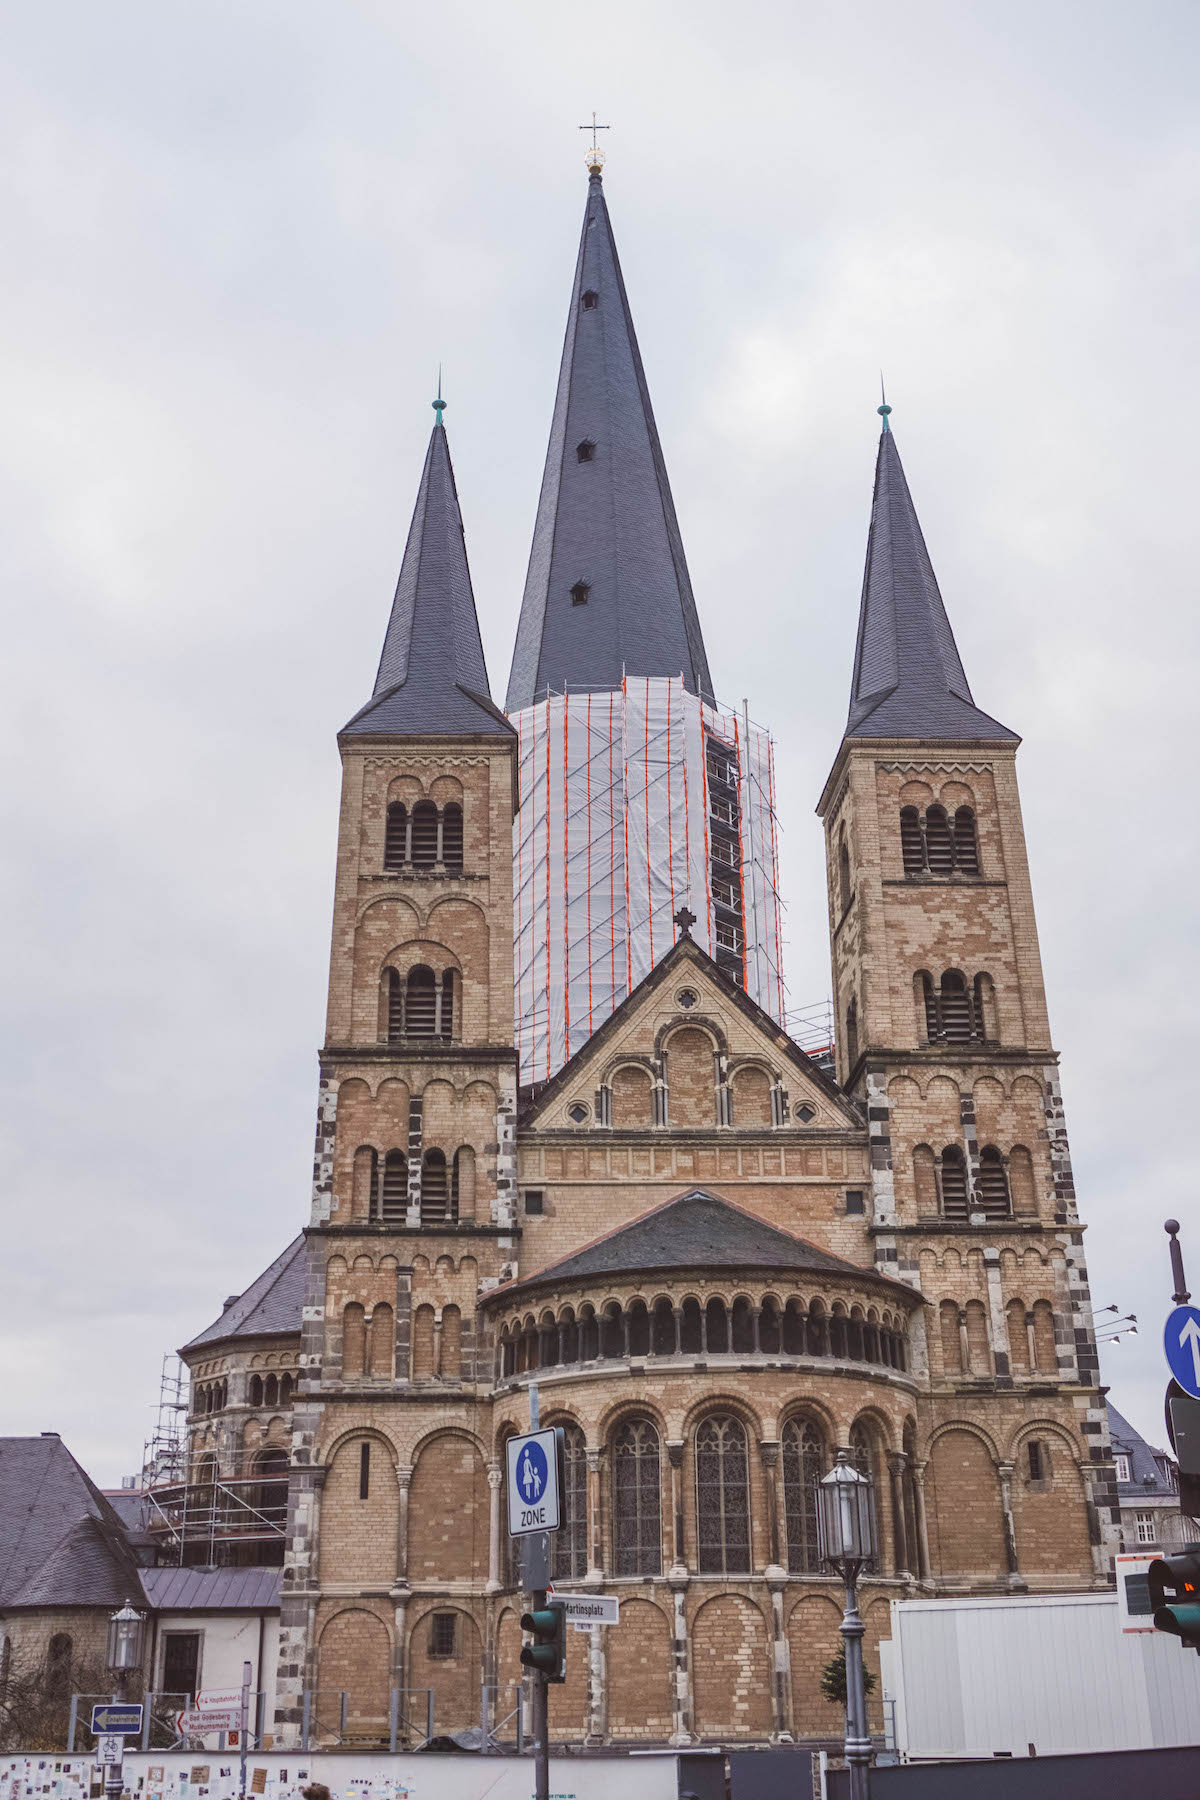 Front view of the Bonn basilica